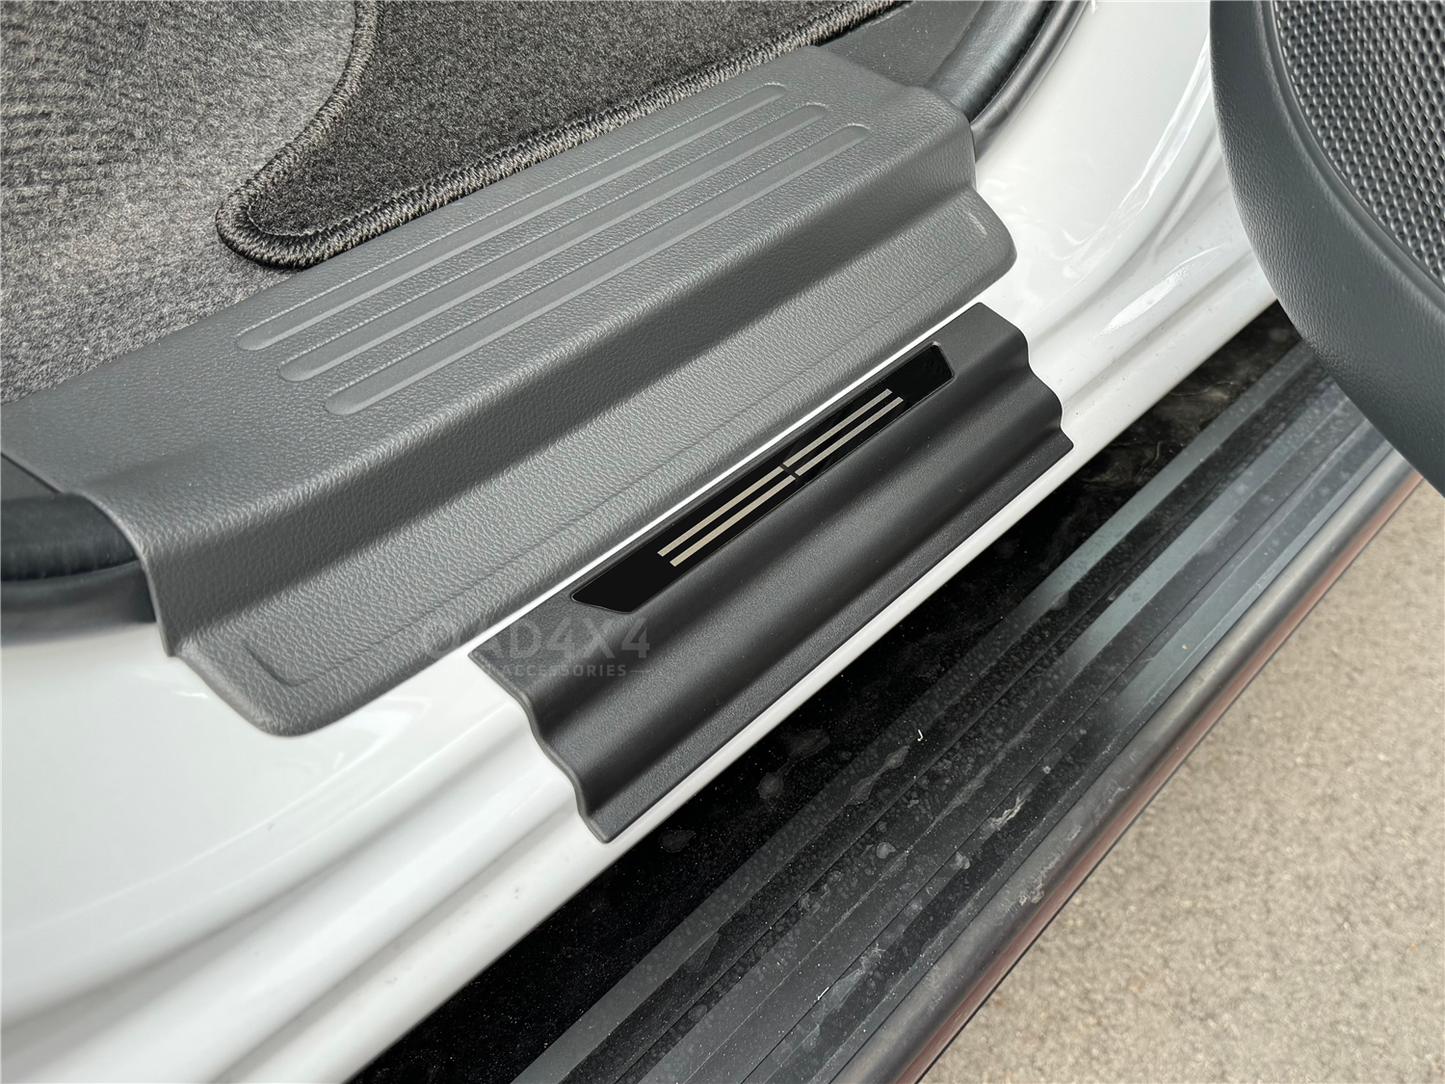 Black Door Sill Protector for Mitsubishi Triton MQ MR Dual Cab 2015-2024 Stainless Steel Scuff Plates Door Sills Protector